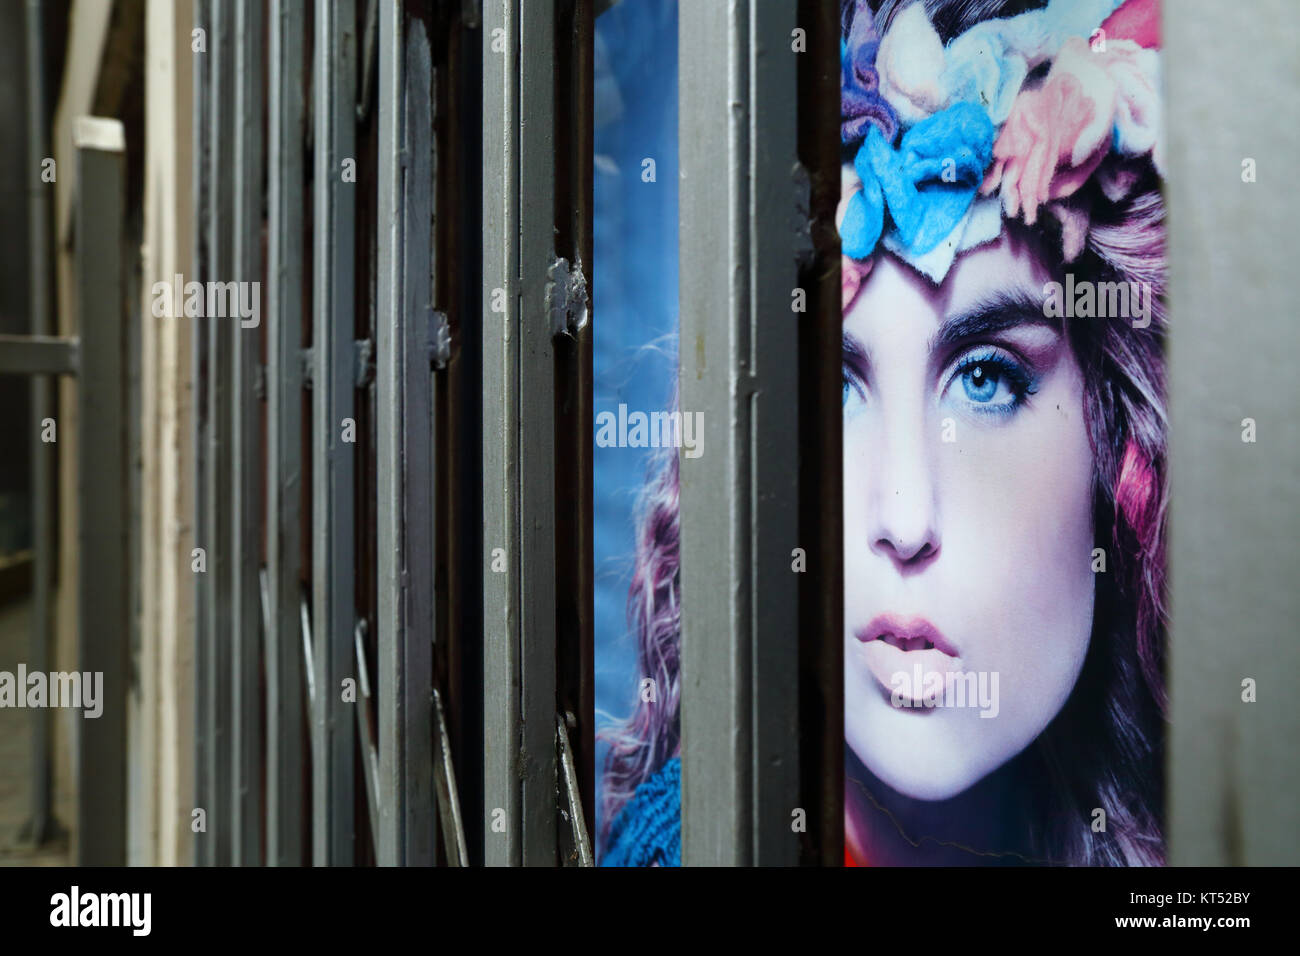 Advertising poster with face of beautiful female model behind security railings on beauty parlour entrance, La Paz, Bolivia Stock Photo